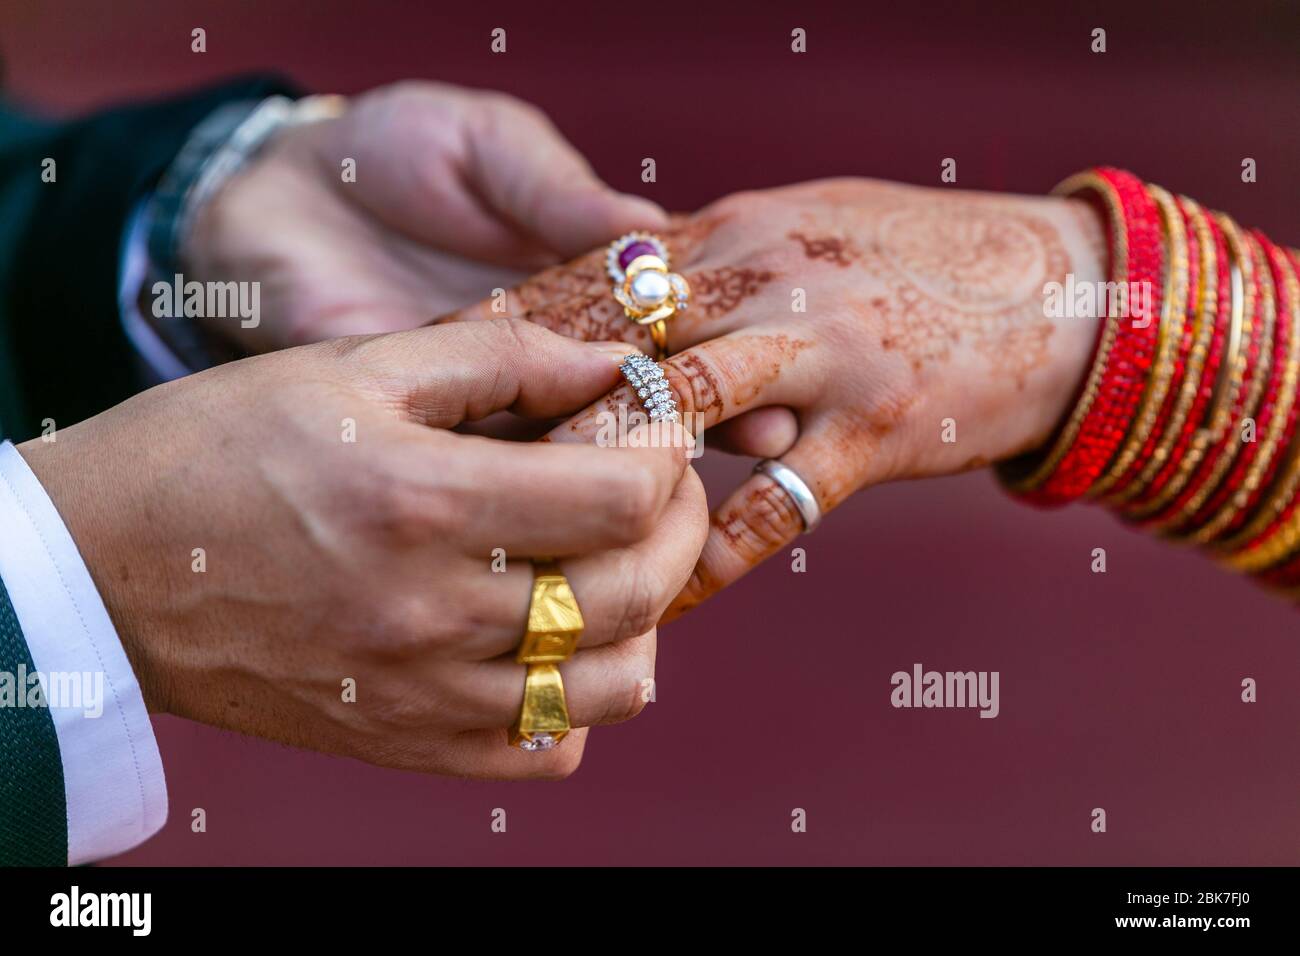 Significance of toe rings in Indian marriage | Times of India